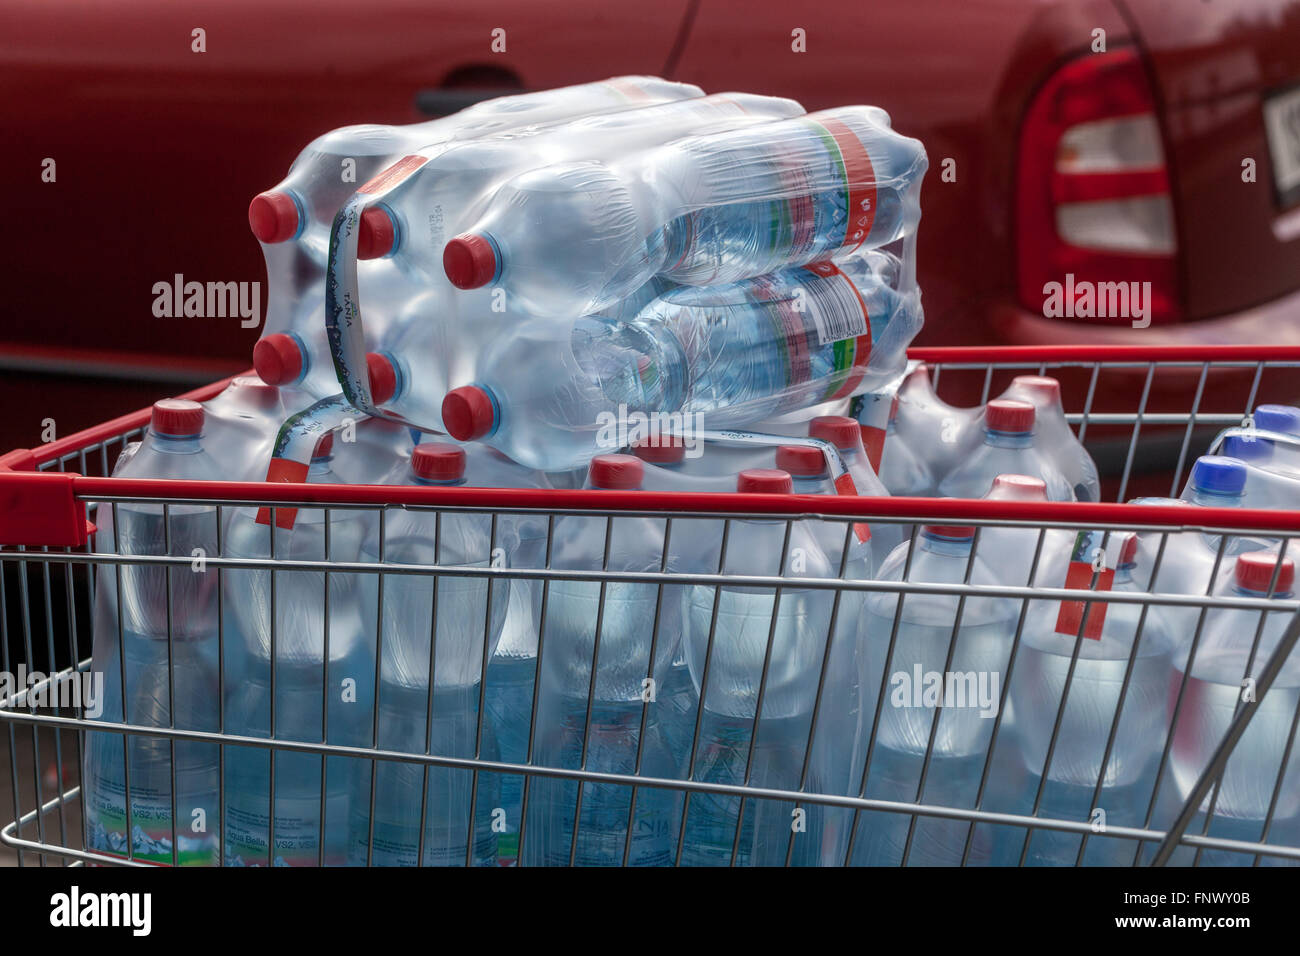 Drinking bottled water drinking water plastic bottles in shopping cart water bottles in supermarket trolley Stock Photo